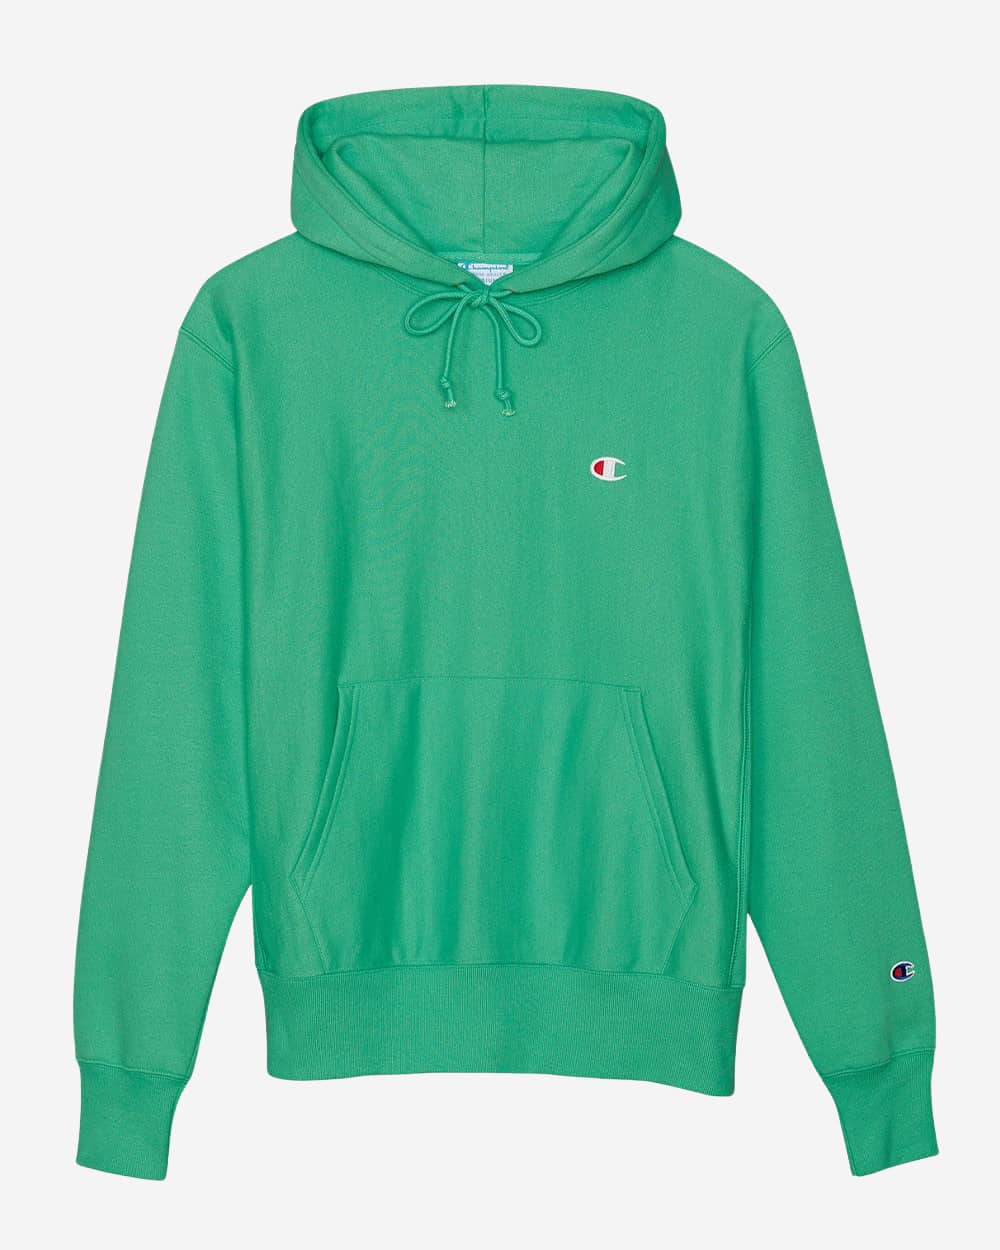 11 Heavyweight Hoodies Brands Making The Thickest Sweats